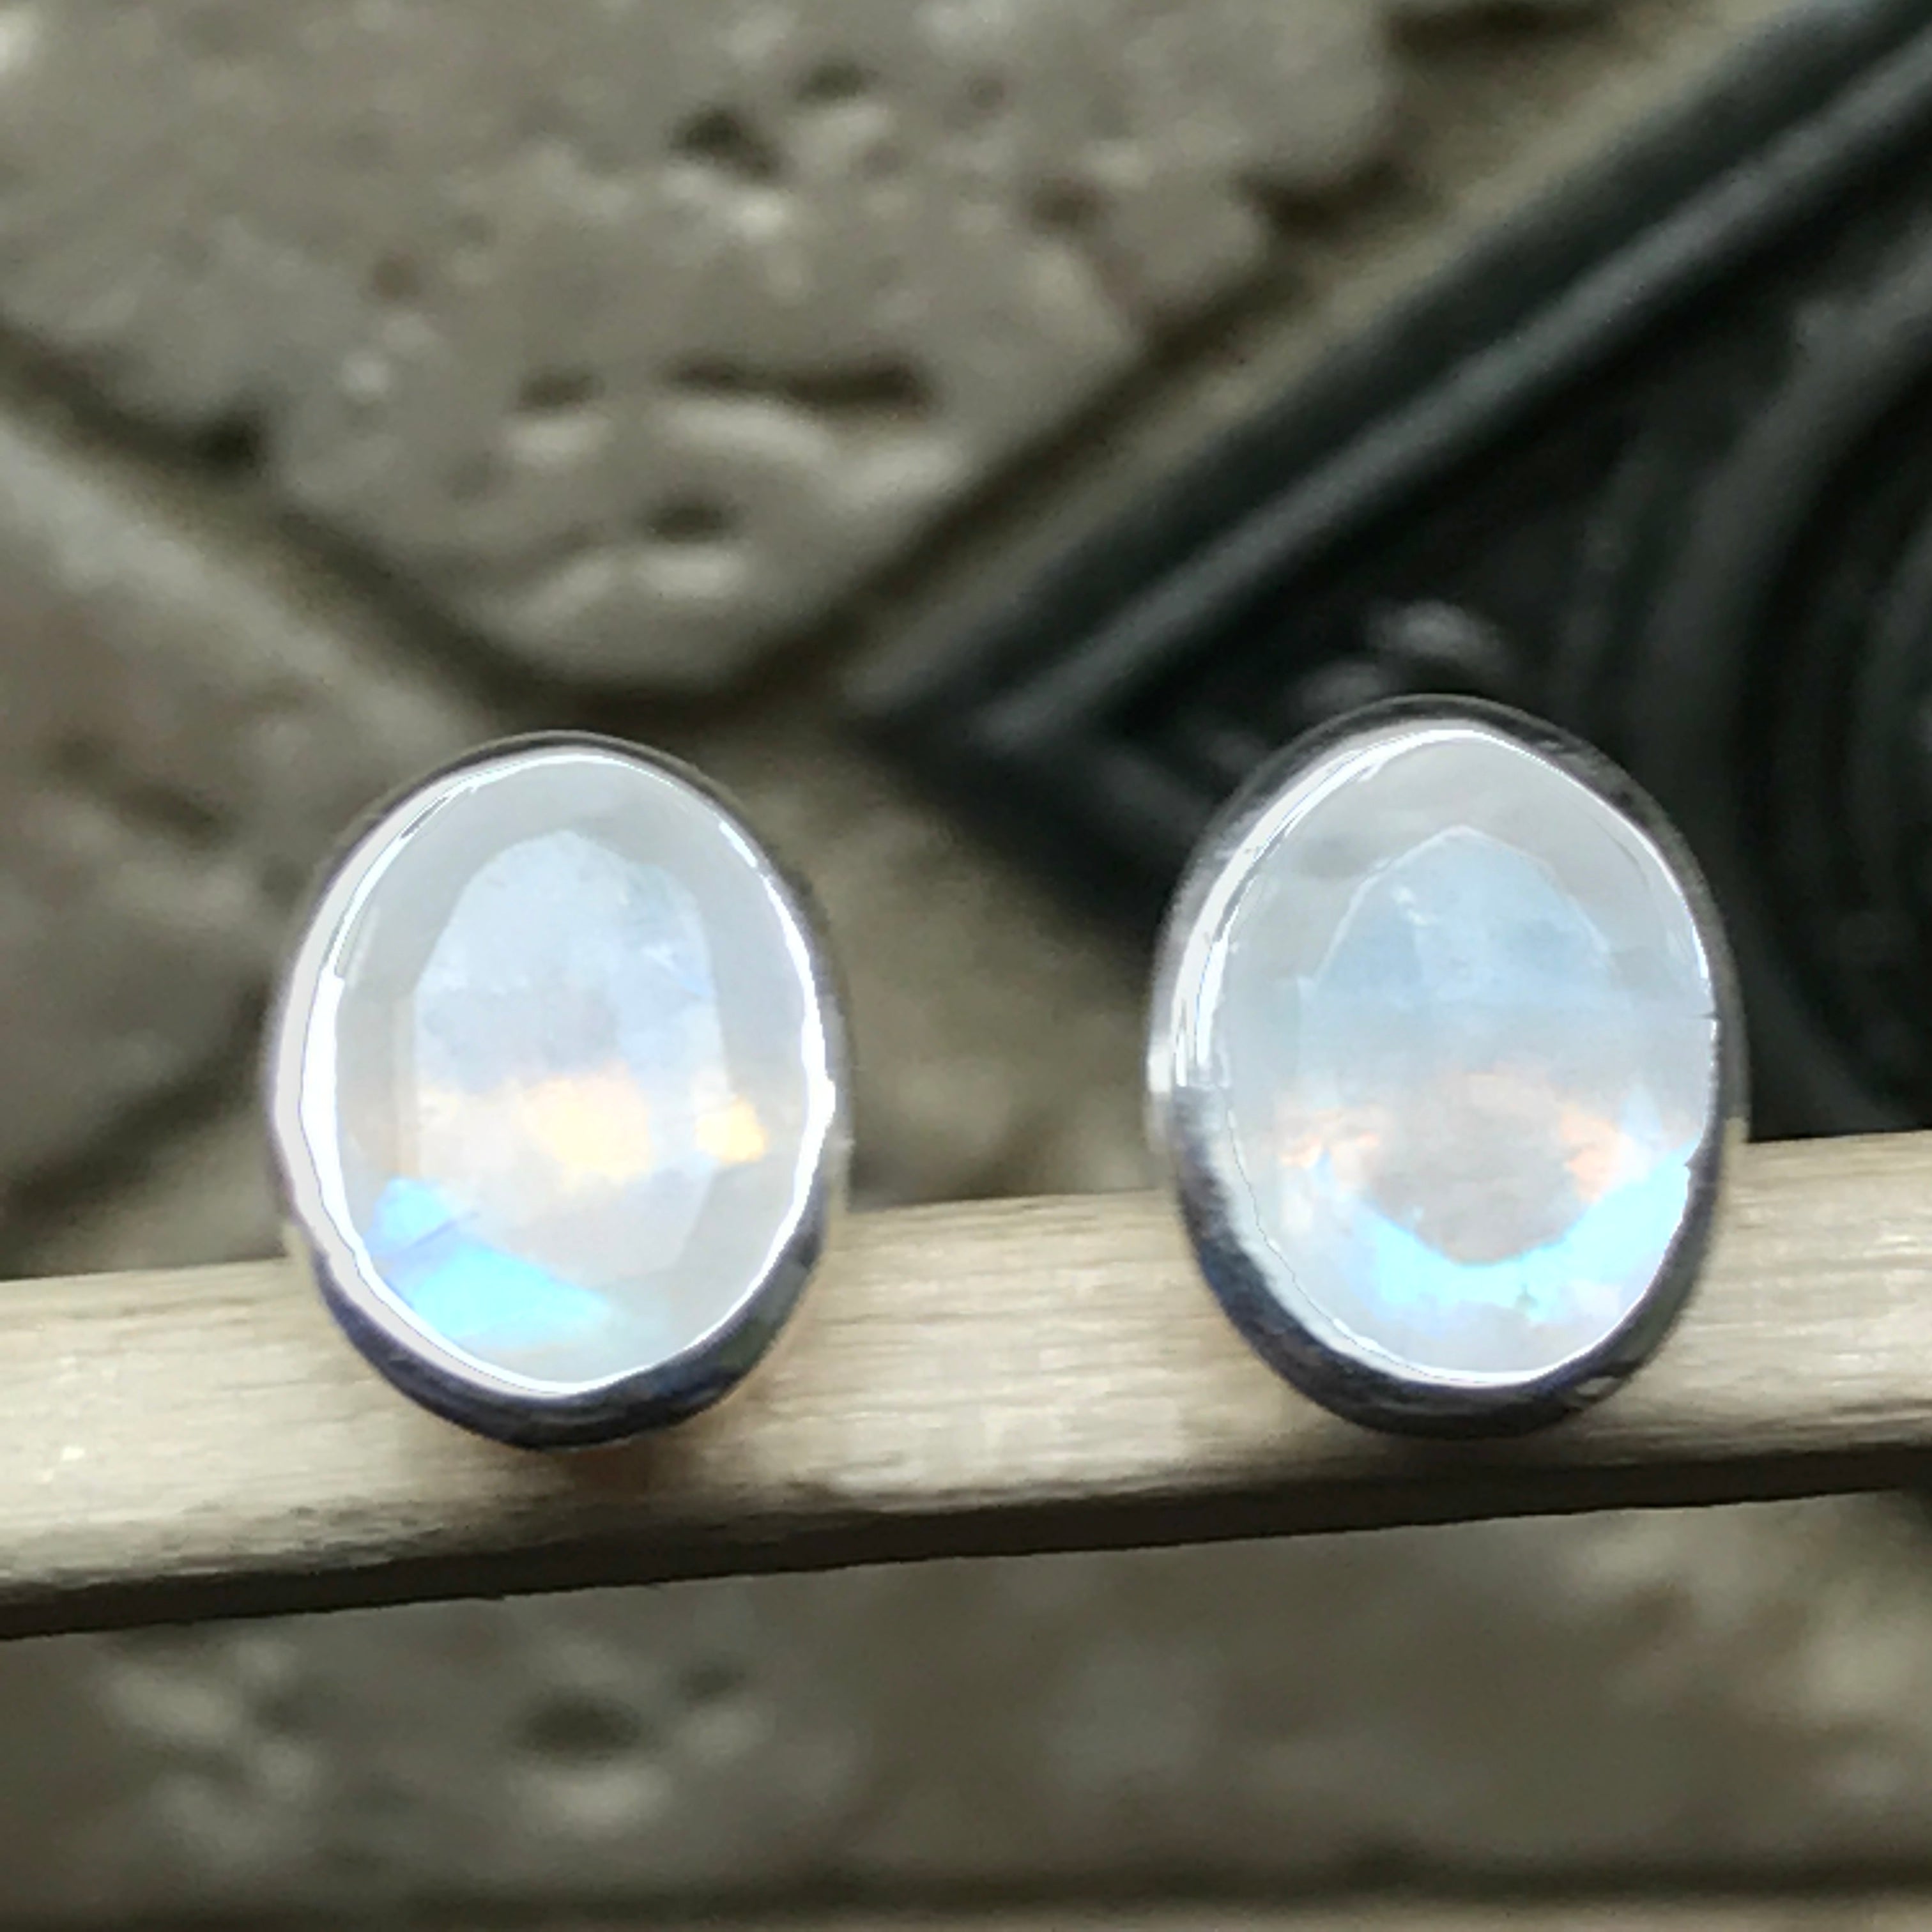 Natural Rainbow Moonstone 925 Solid Sterling Silver Earrings 8mm - Natural Rocks by Kala